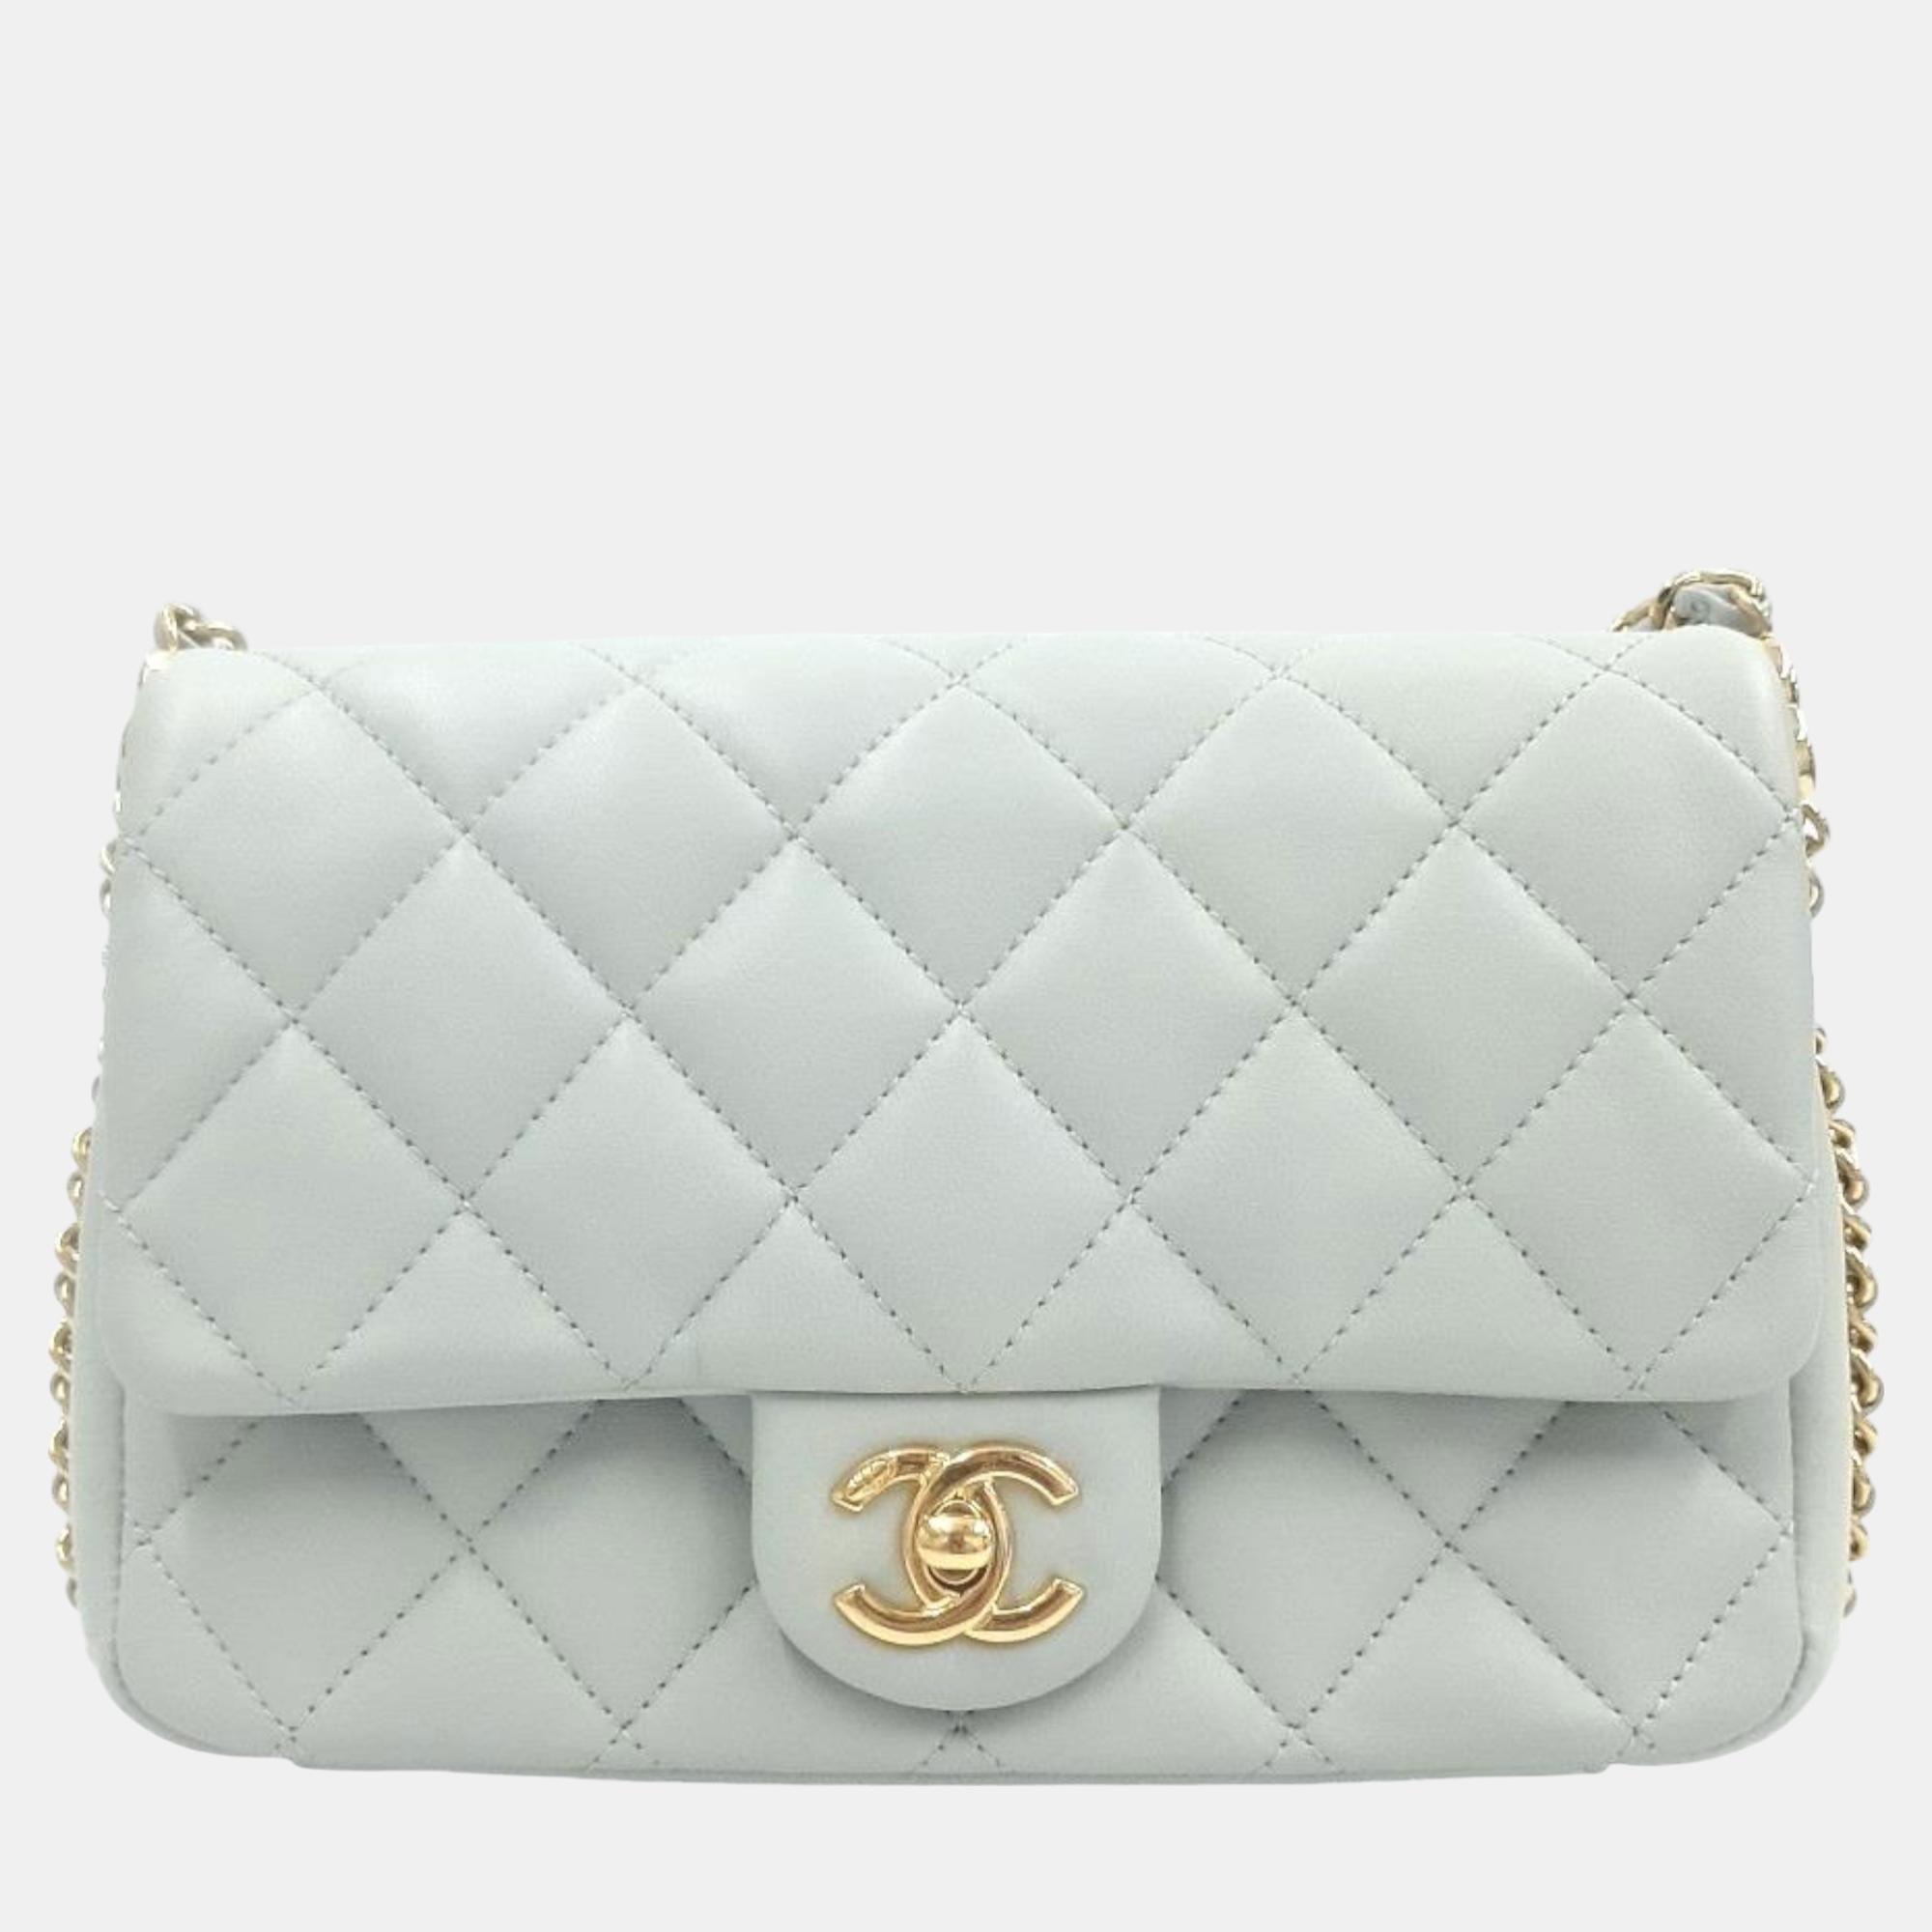 Known for creating exclusive meticulously crafted instantly recognizable fashion items Chanel is a brand coveted around the world. Indulge in the Chanel way of luxury with this pretty bag.